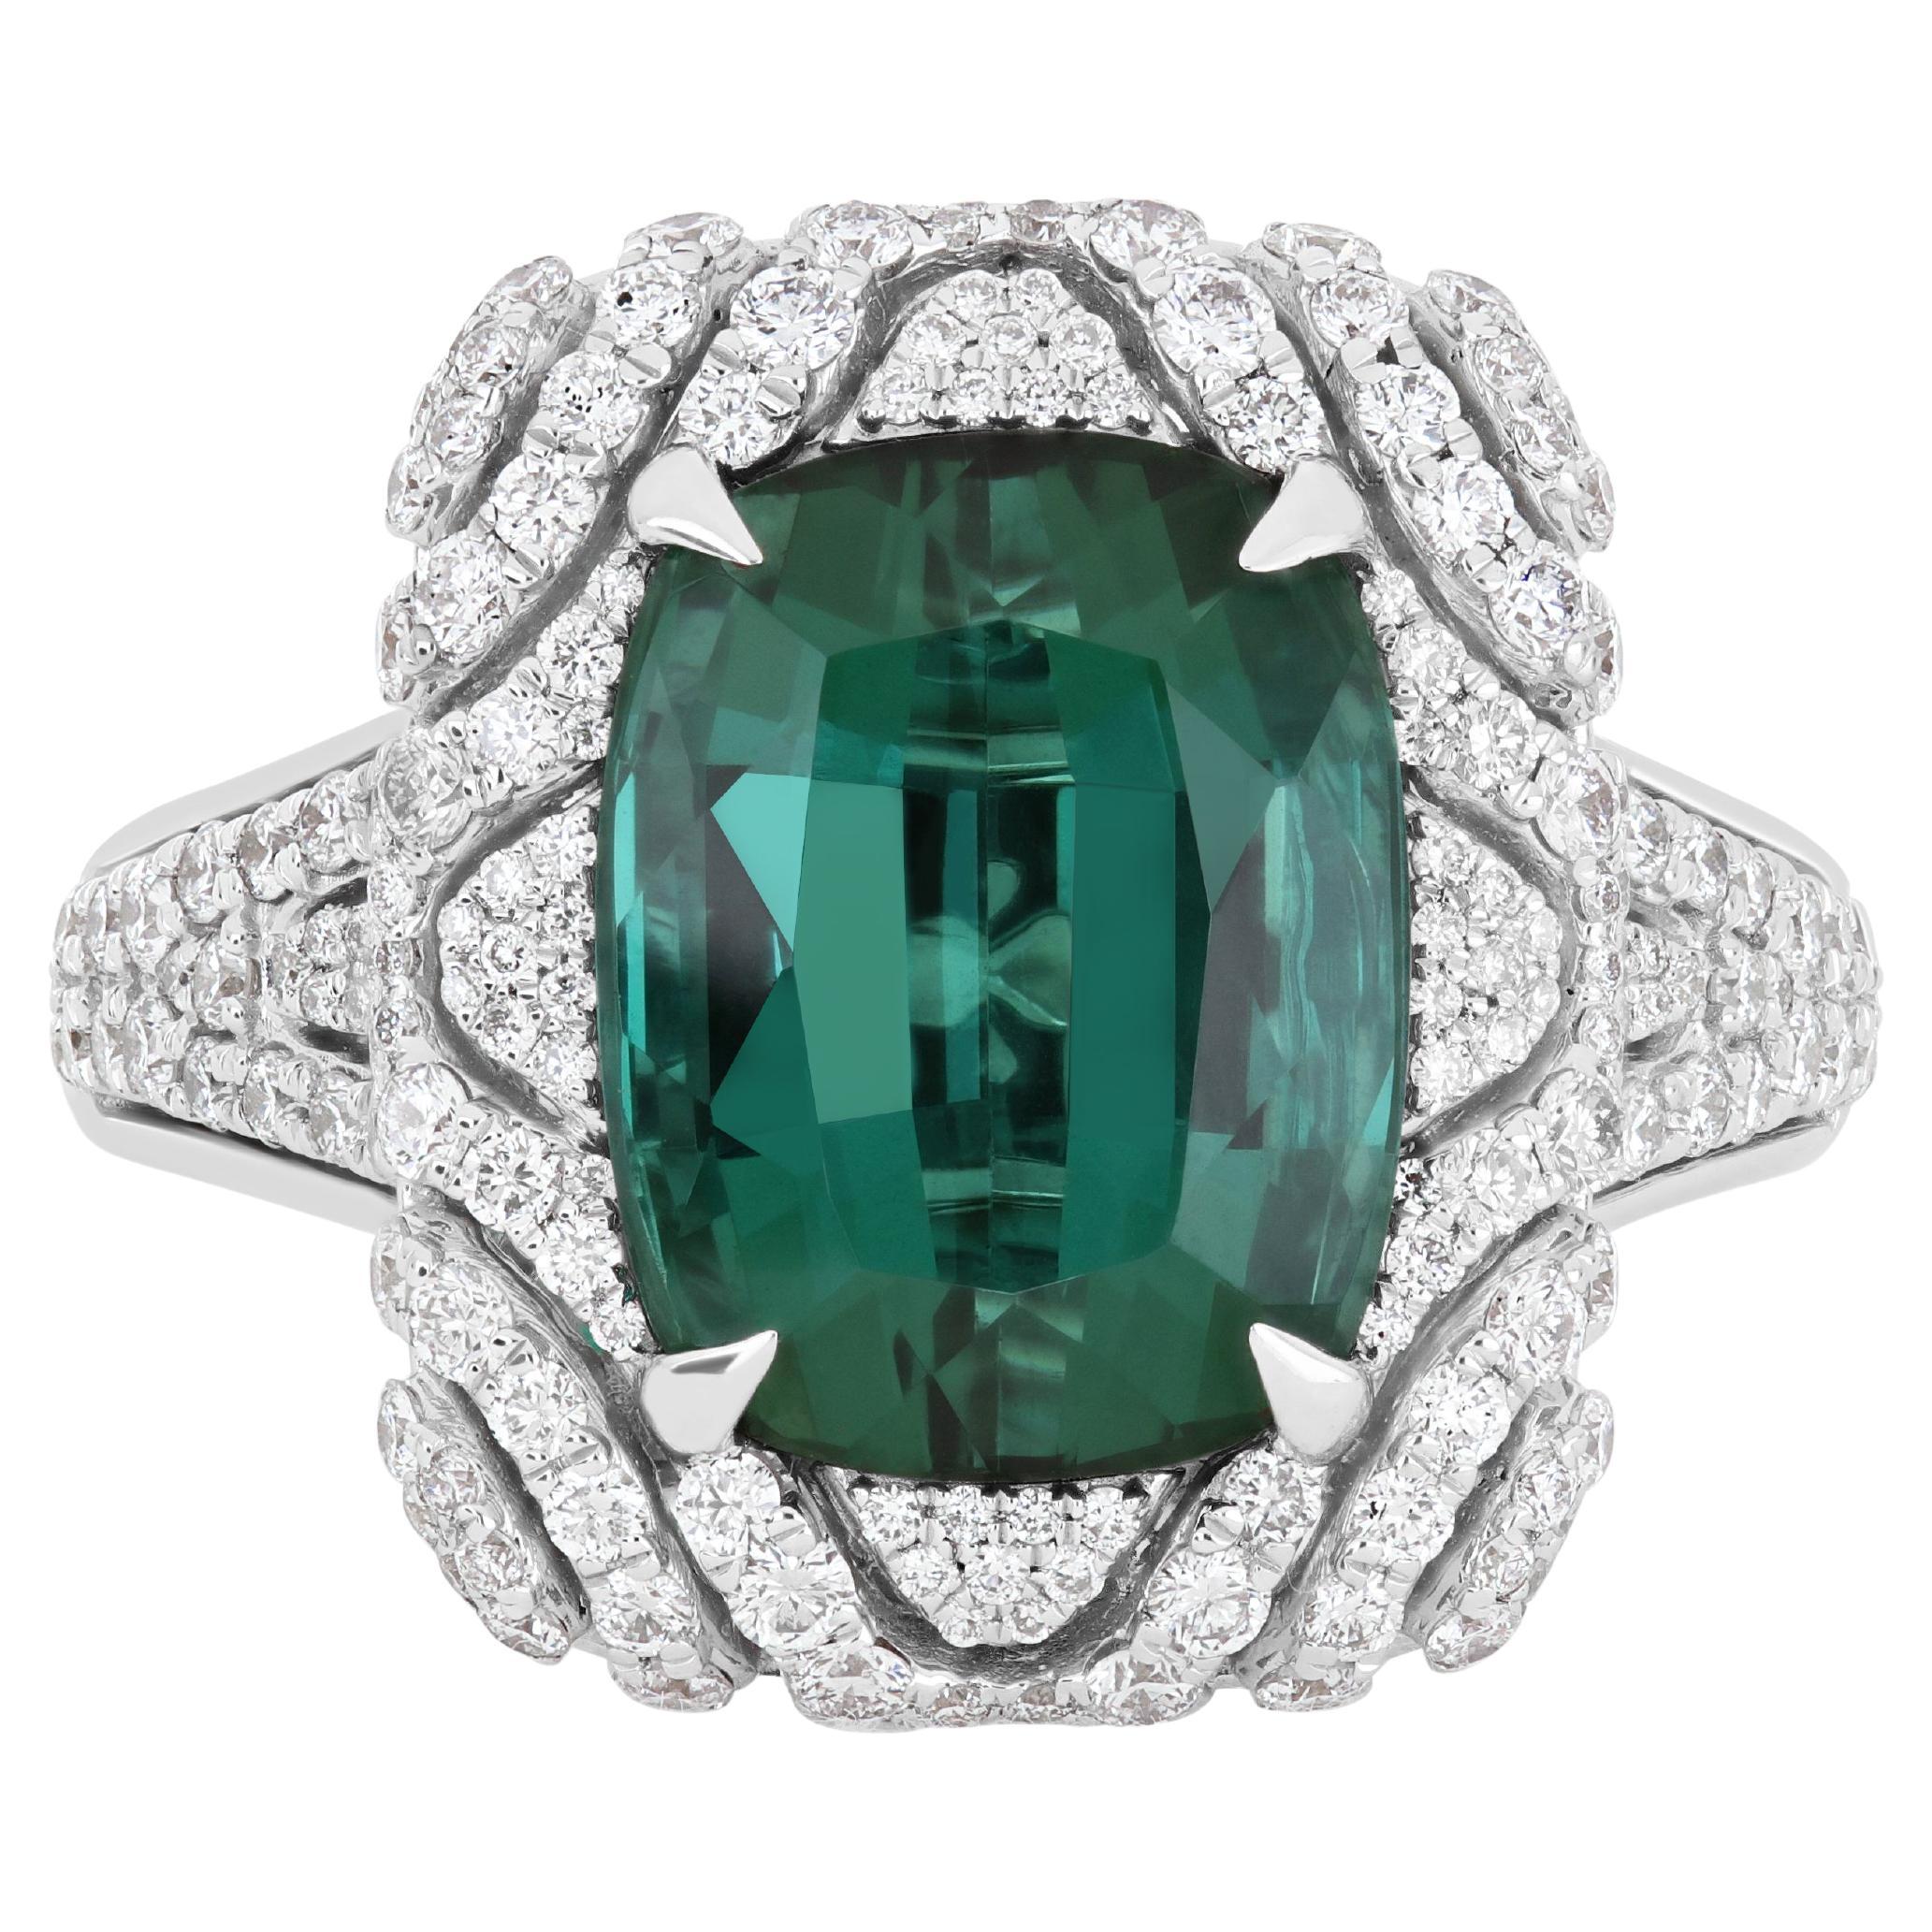 8.7 Carat Green Tourmaline and Diamond Studded Ring in 18K White Gold For Sale